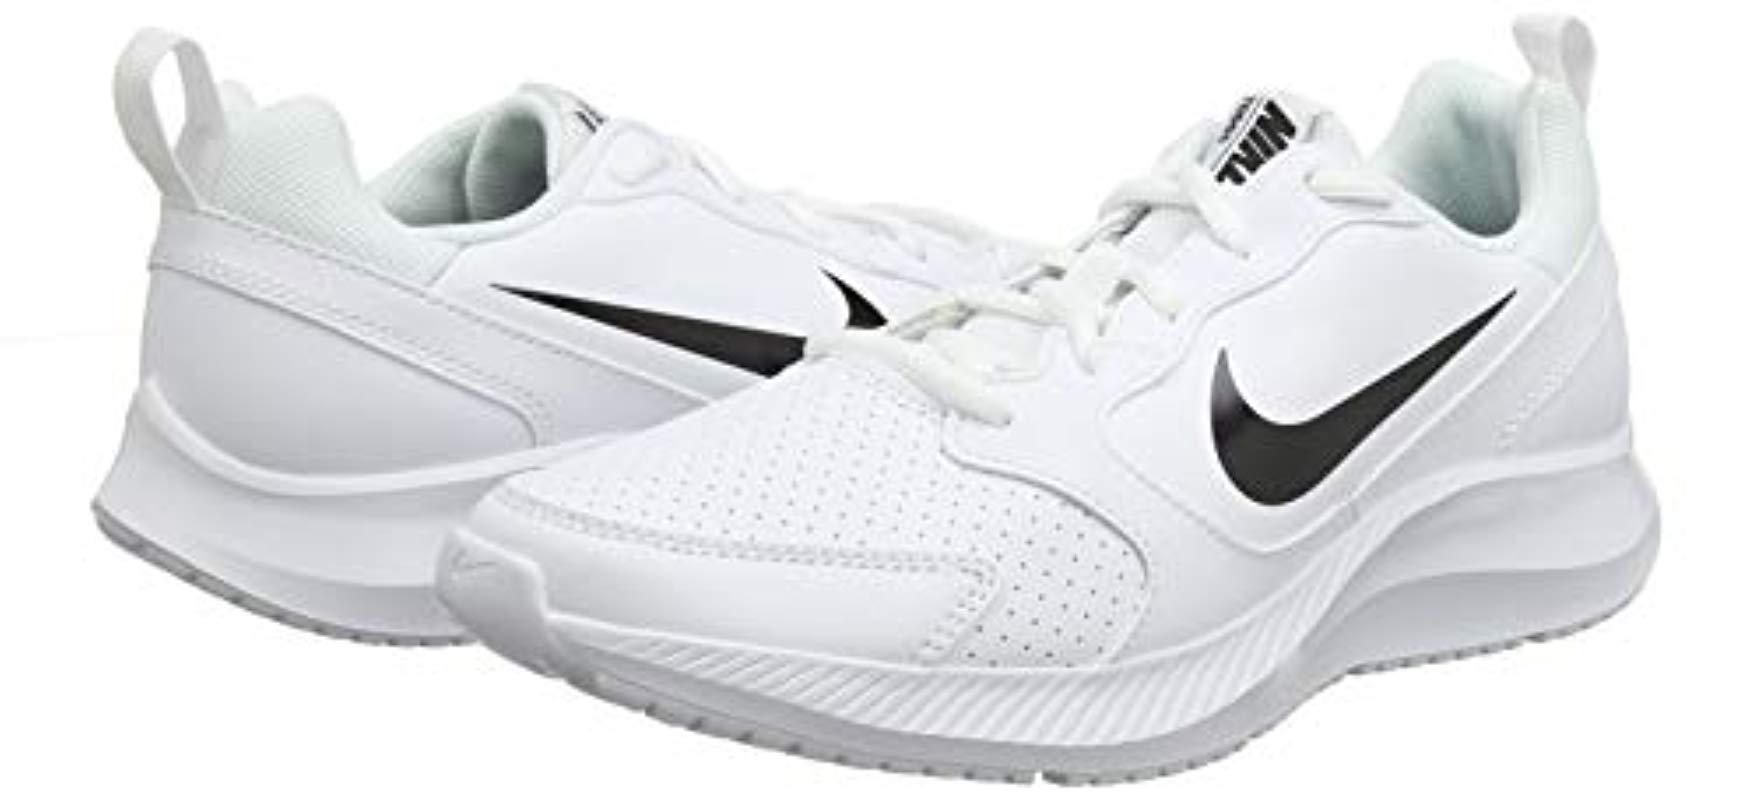 Nike Todos Training Shoes in White for Men - Lyst